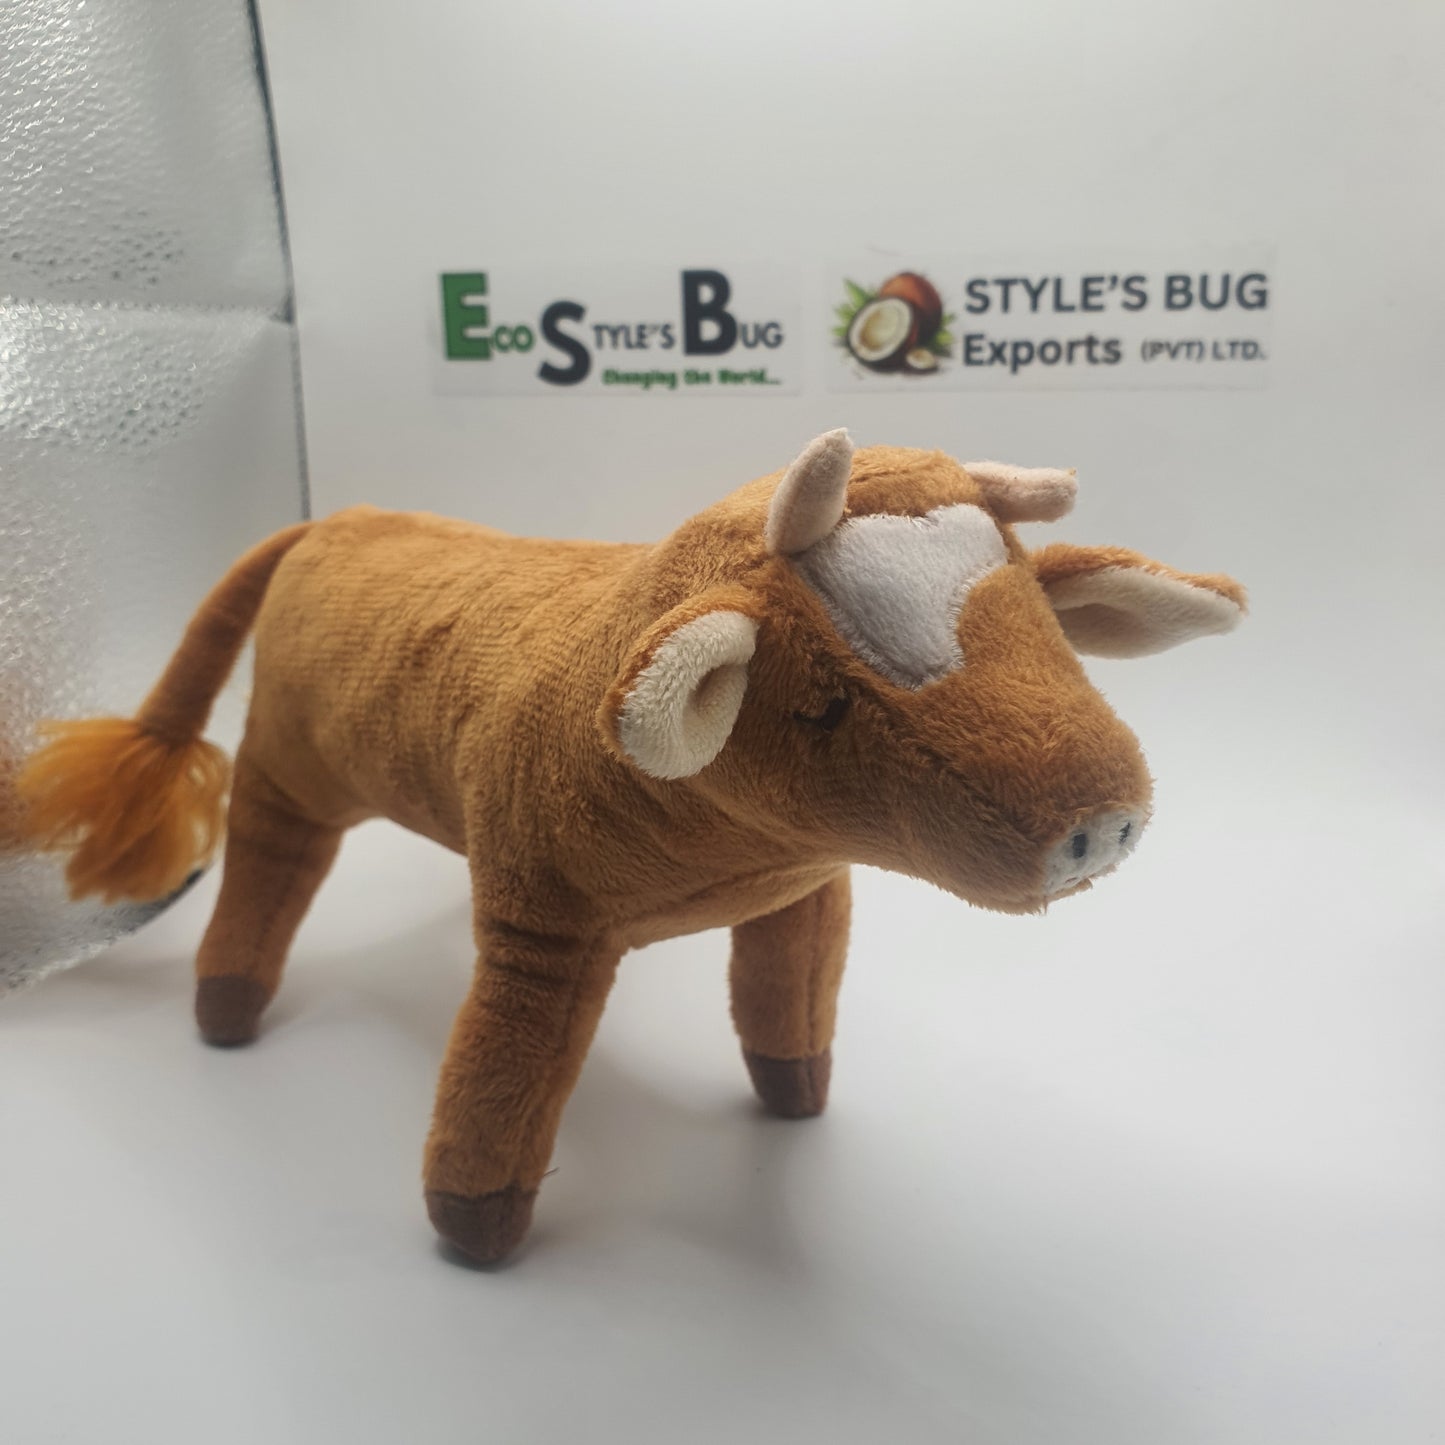 Mr. Recycled Cow - Handmade Realistic Plushie from SB